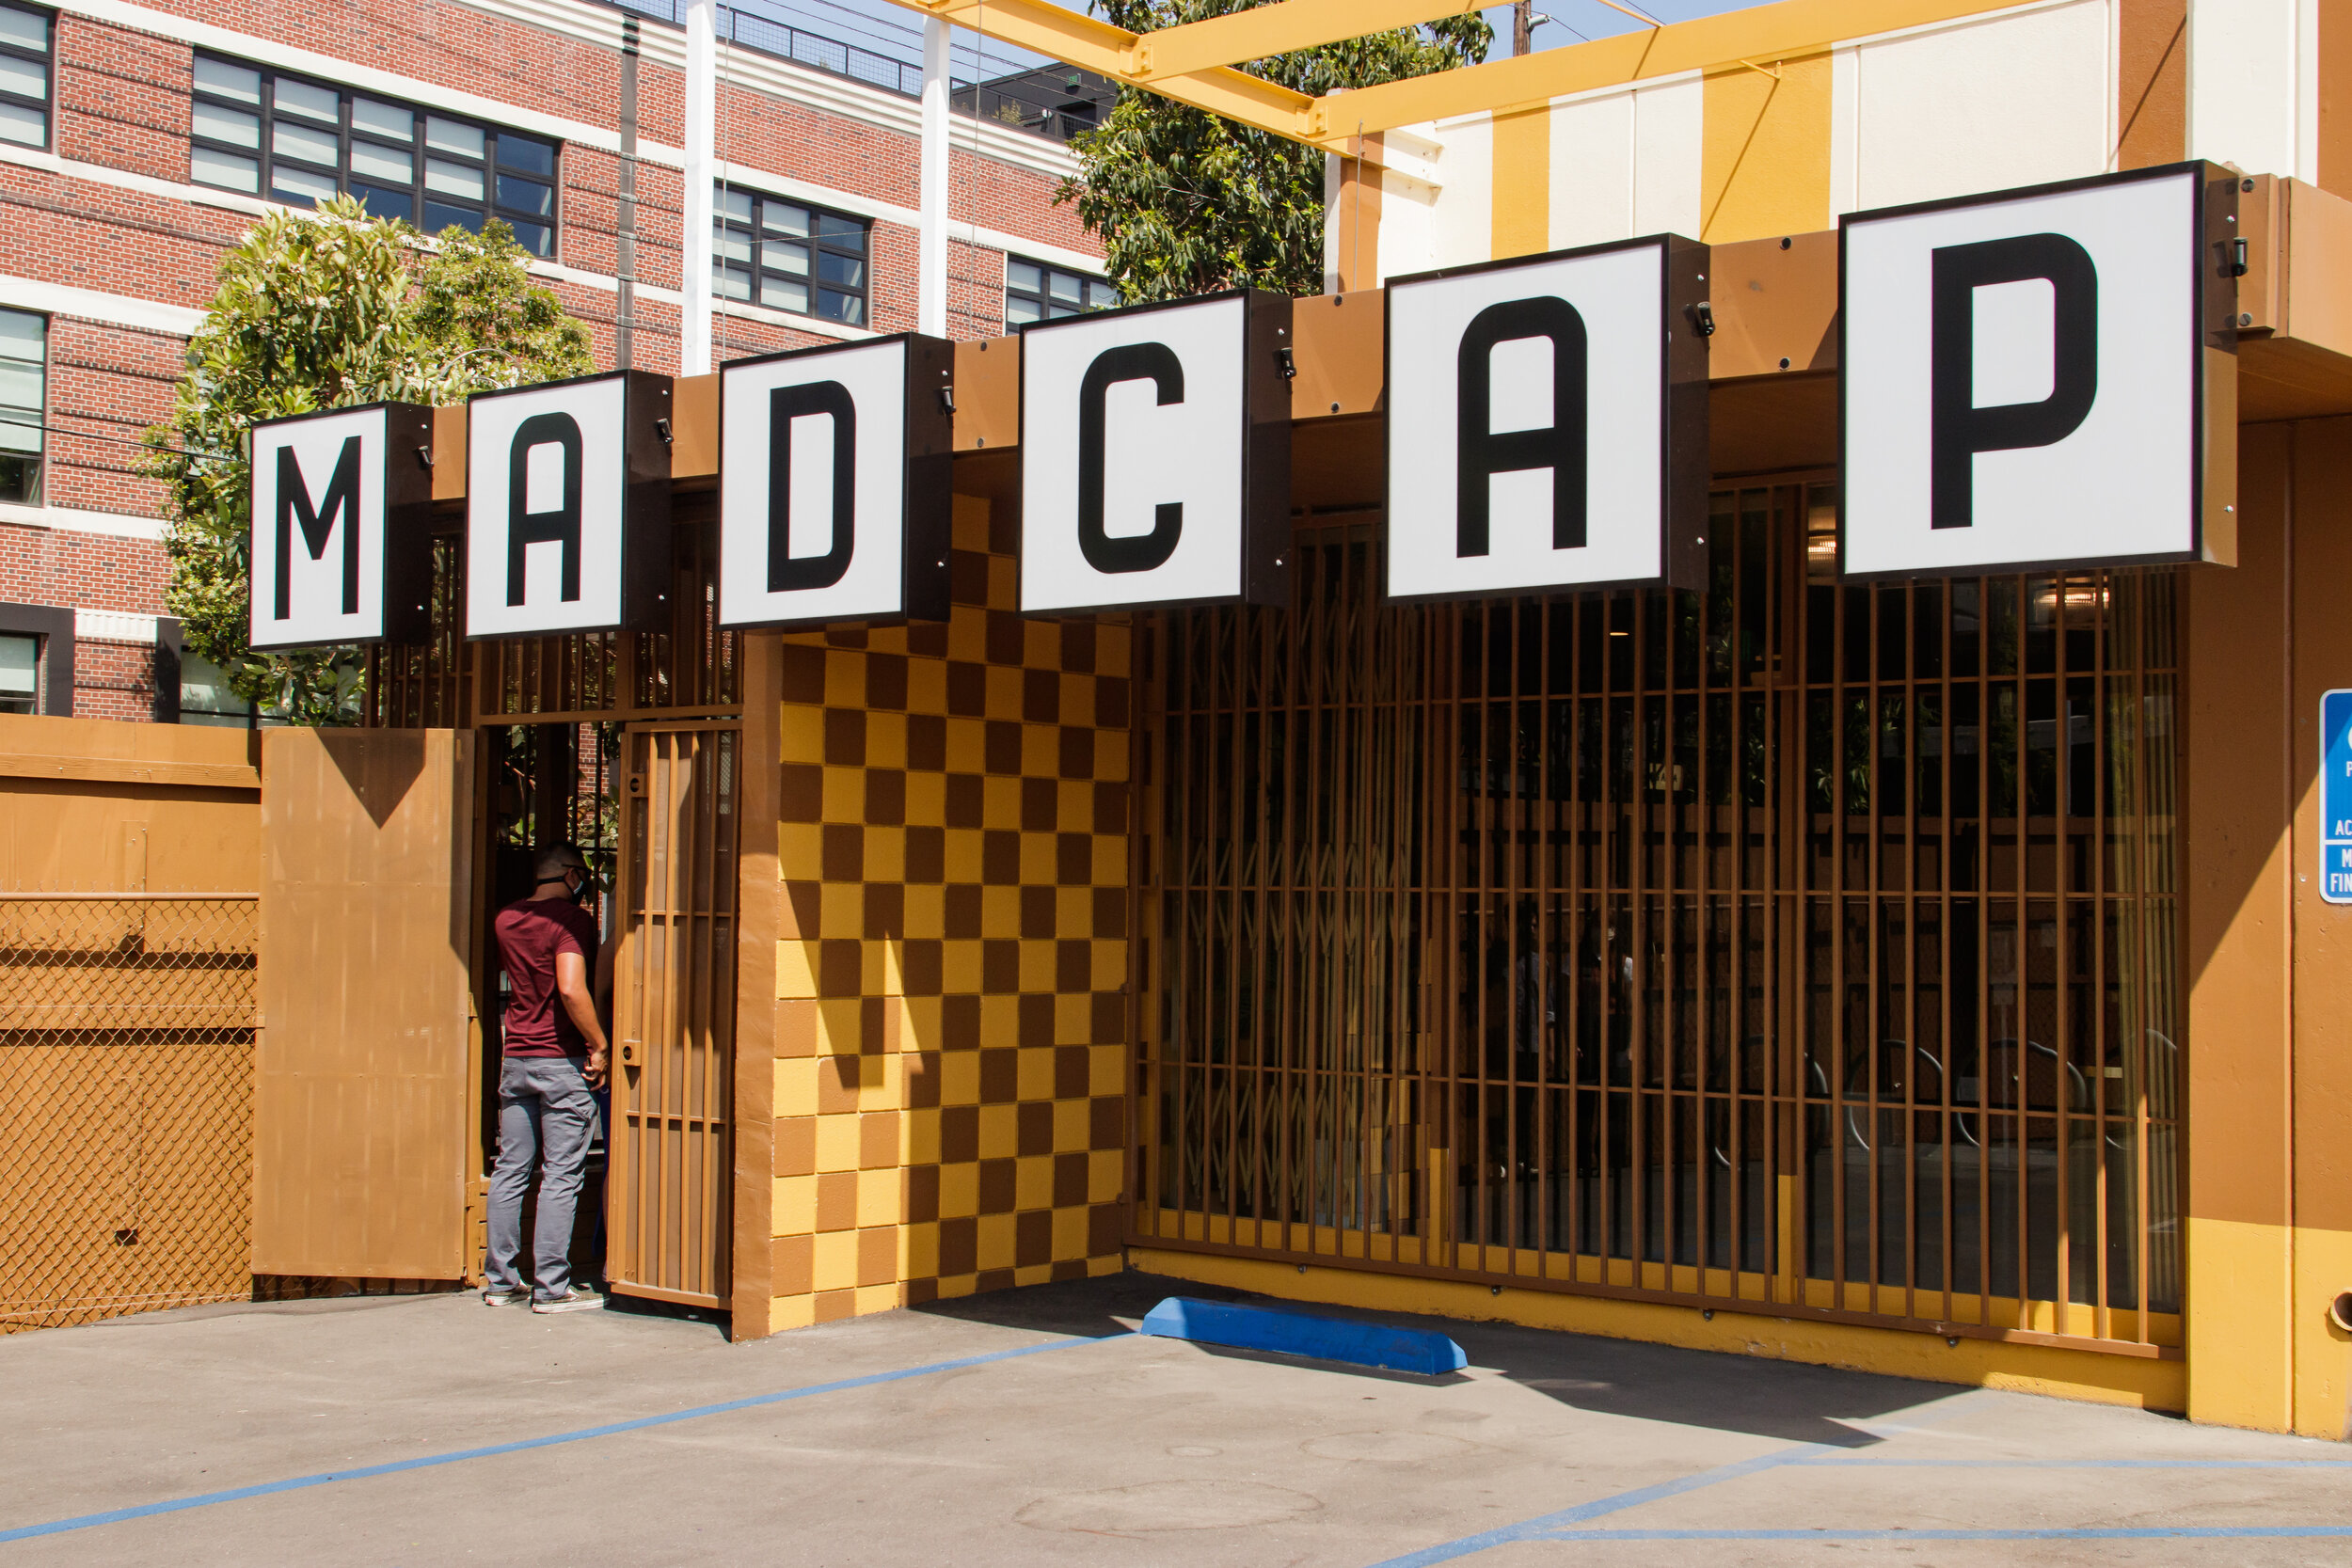   Exterior of the Madcap Motel, in downtown Los Angeles, Calif., on Saturday, May 8, 2021.. Advertised as an "immersive adventure full of visual oddities &amp; whimsical wonders" it contains 18 rooms lit and decorated by artist, Paige Solomon. Marco 